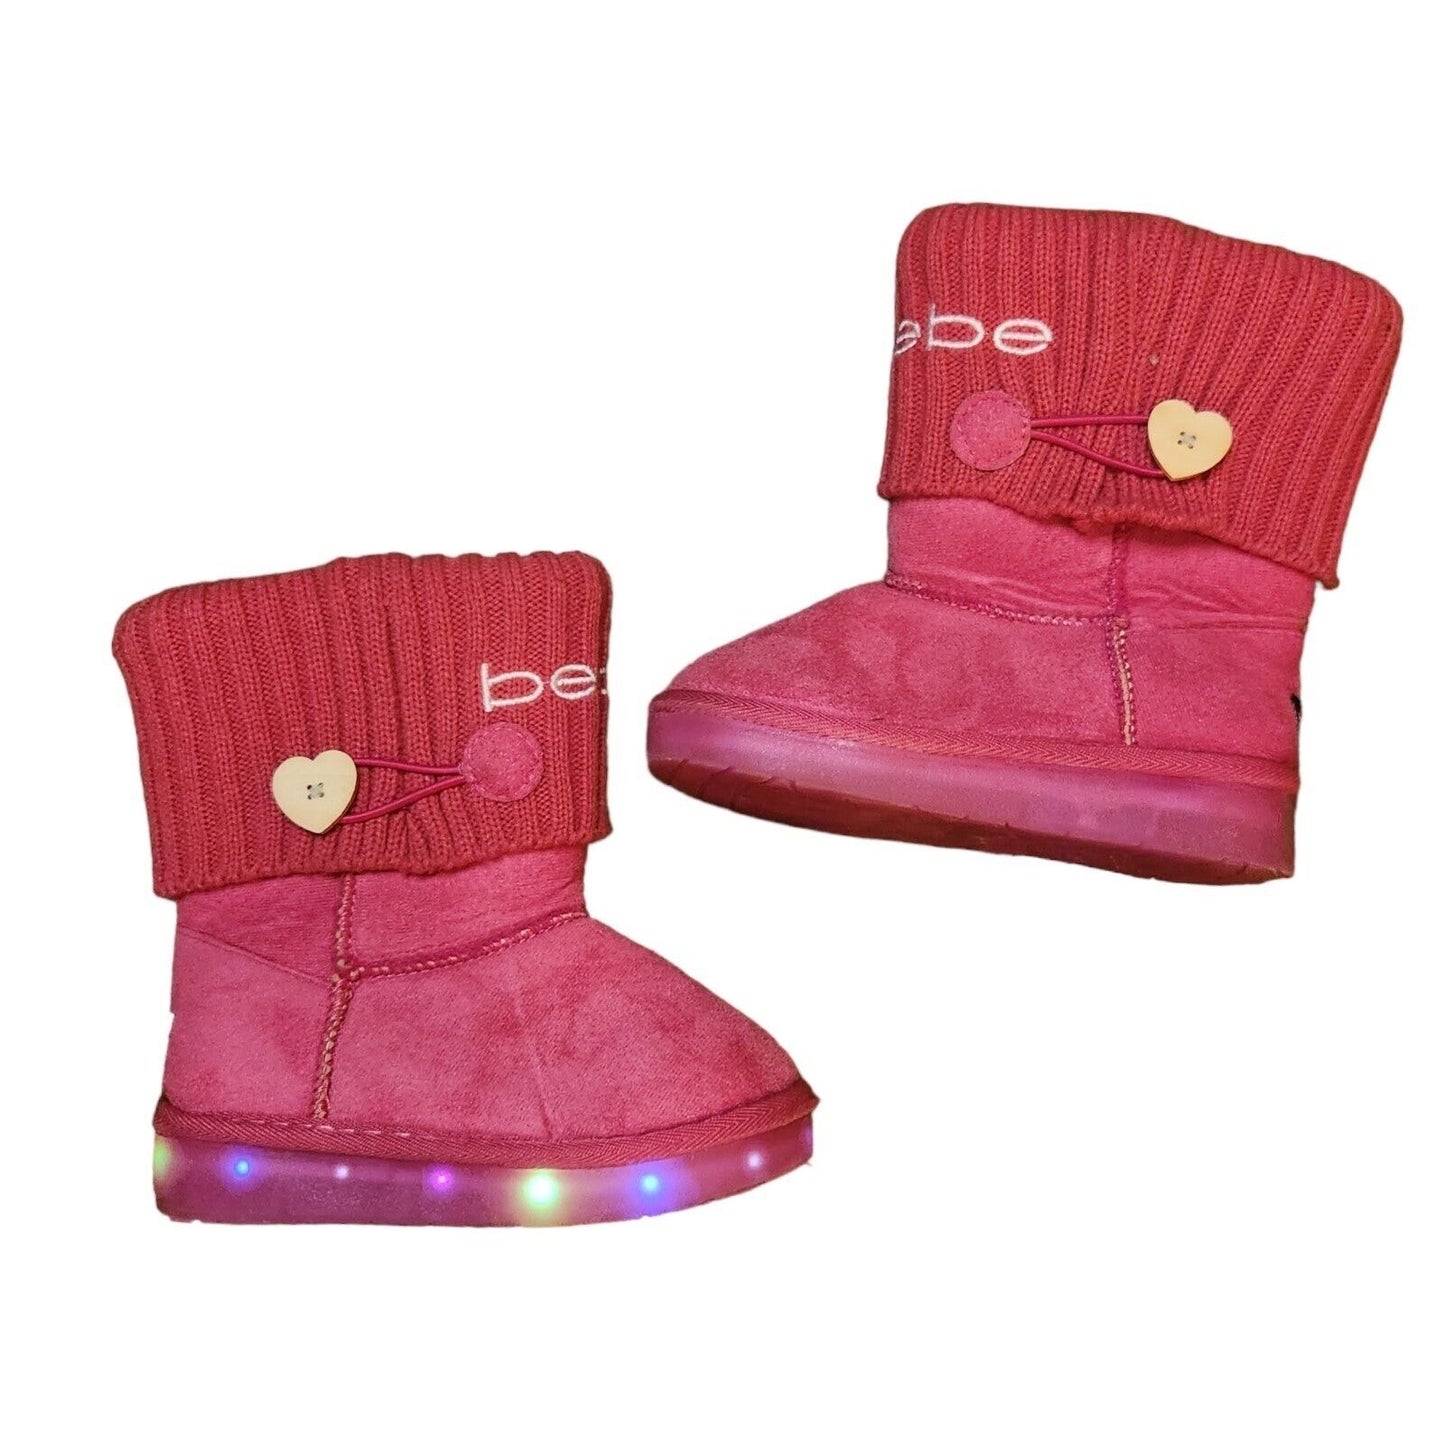 Bebe Girls' Size 10 Hot Pink Fold Over Microsuede Light Up Boots